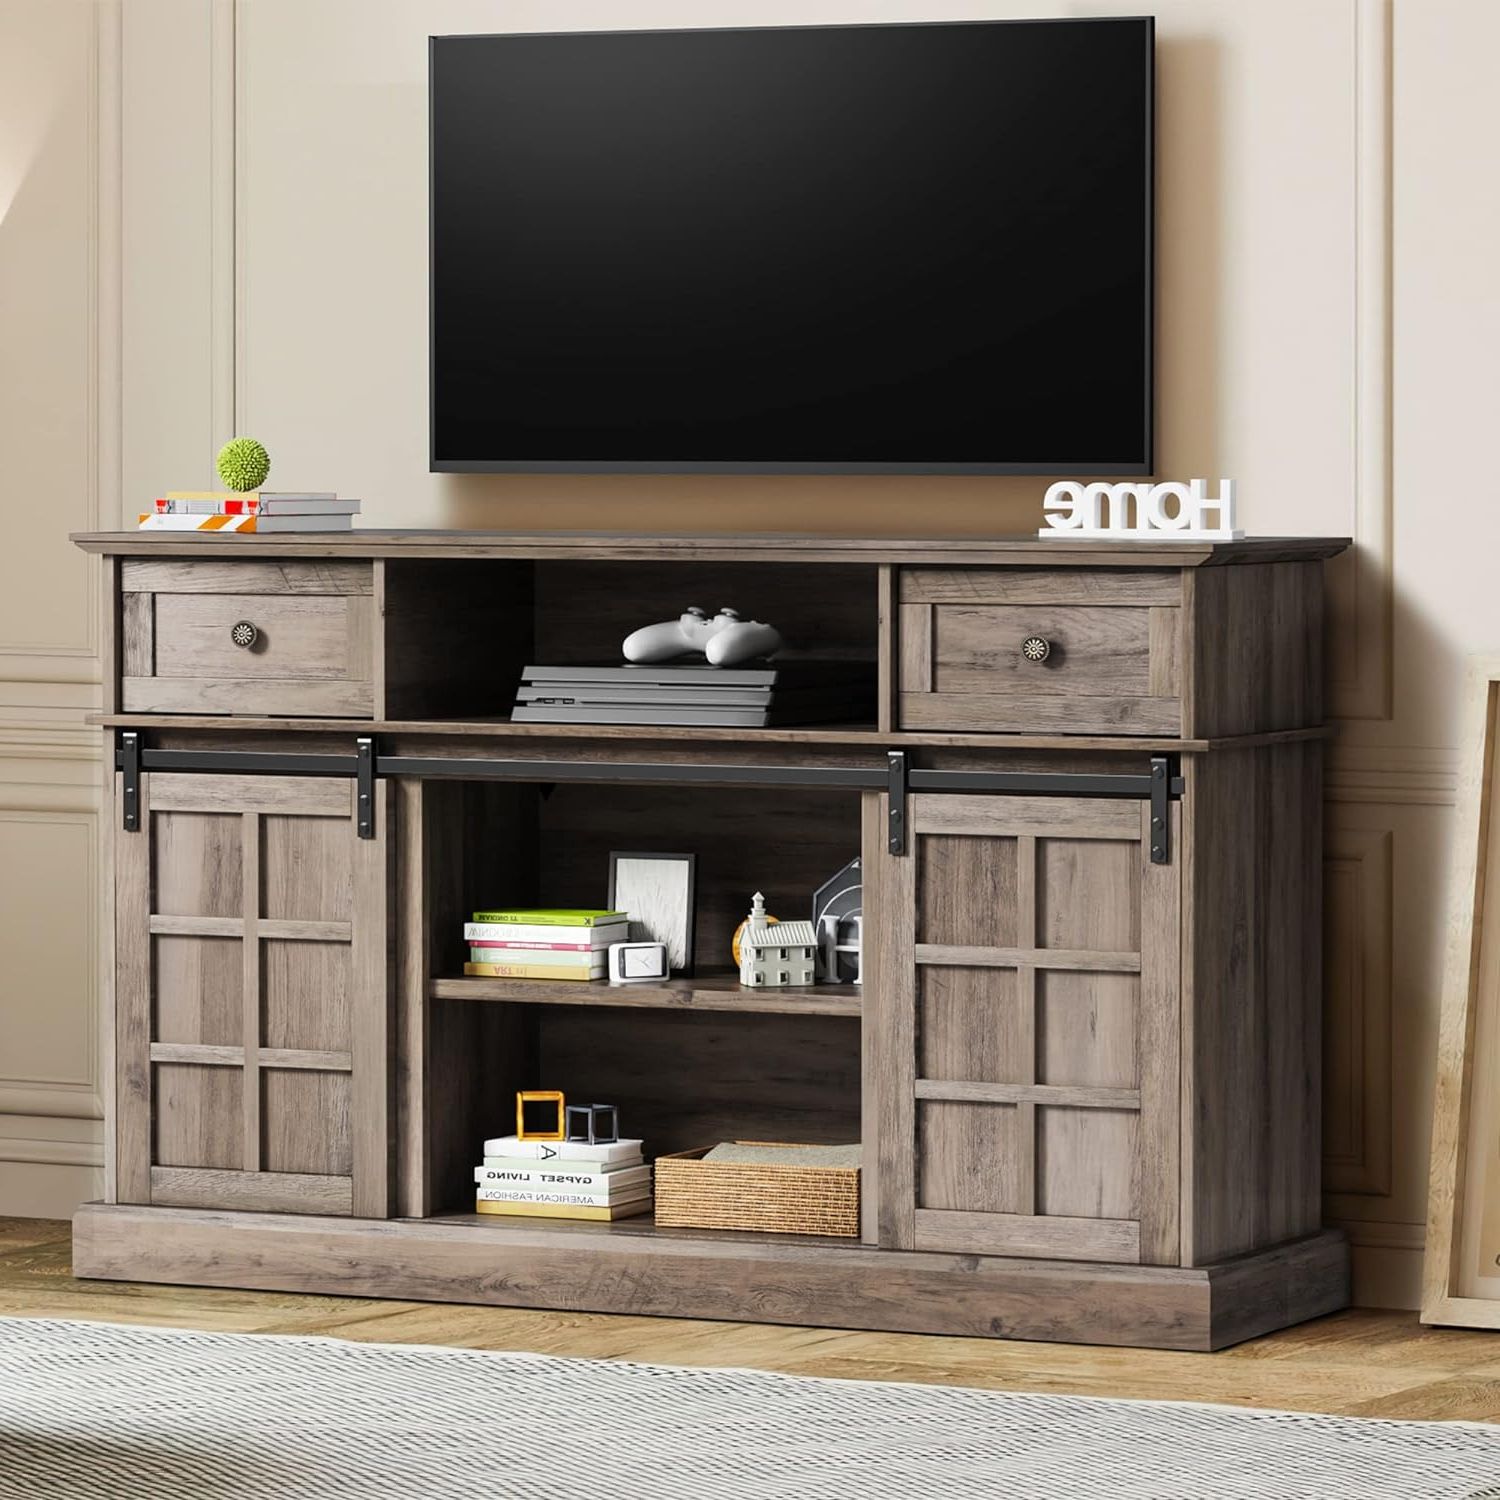 Lghm Entertainment Center, Farmhouse Tv Stand For 65 Nepal | Ubuy Intended For Farmhouse Media Entertainment Centers (View 14 of 20)